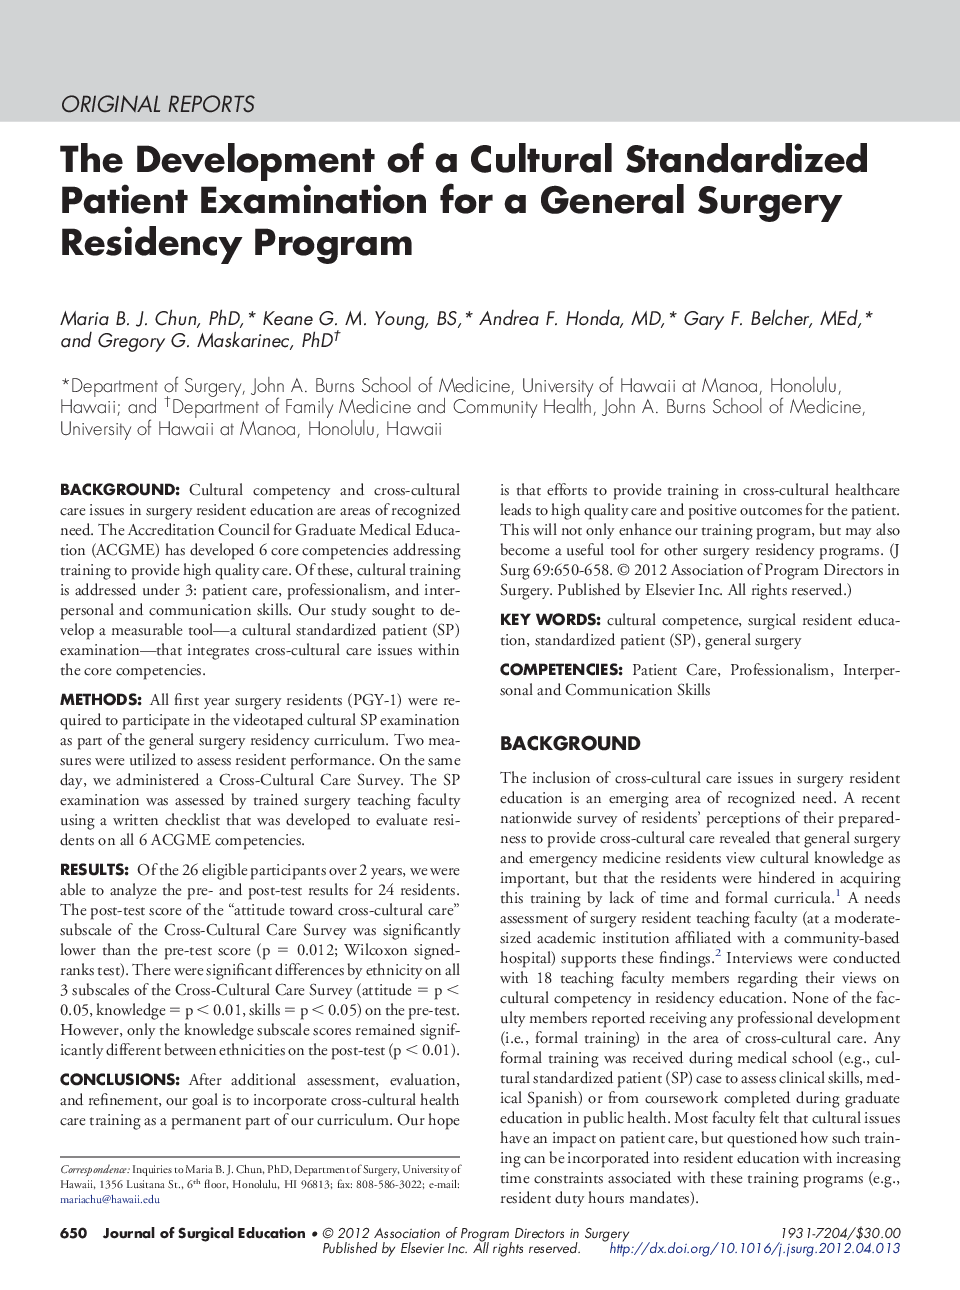 The Development of a Cultural Standardized Patient Examination for a General Surgery Residency Program